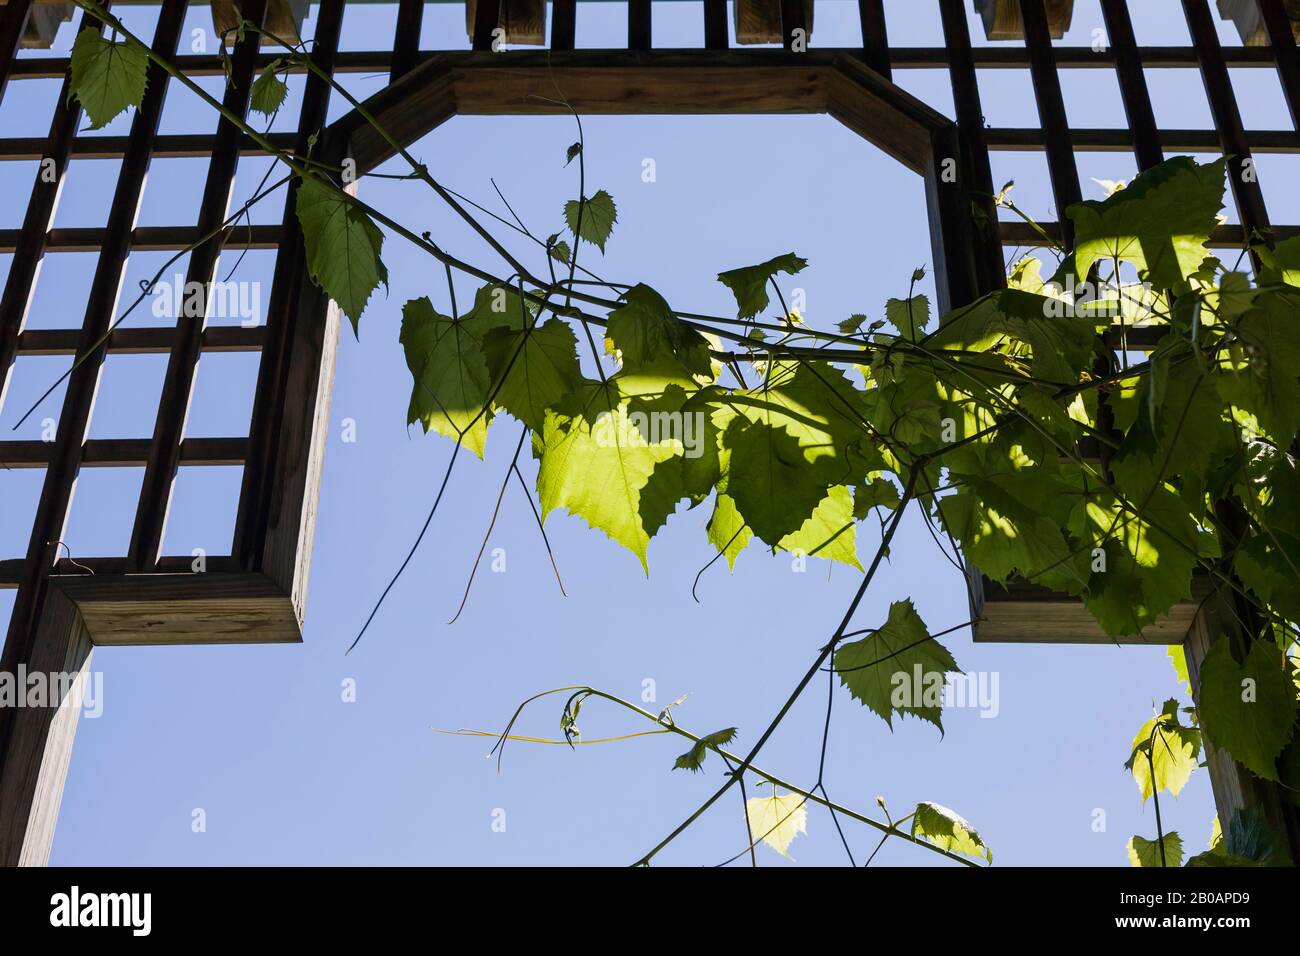 Climbing Vitis riparia - Grapevine growing on wooden trellis against a blue sky in summer Stock Photo